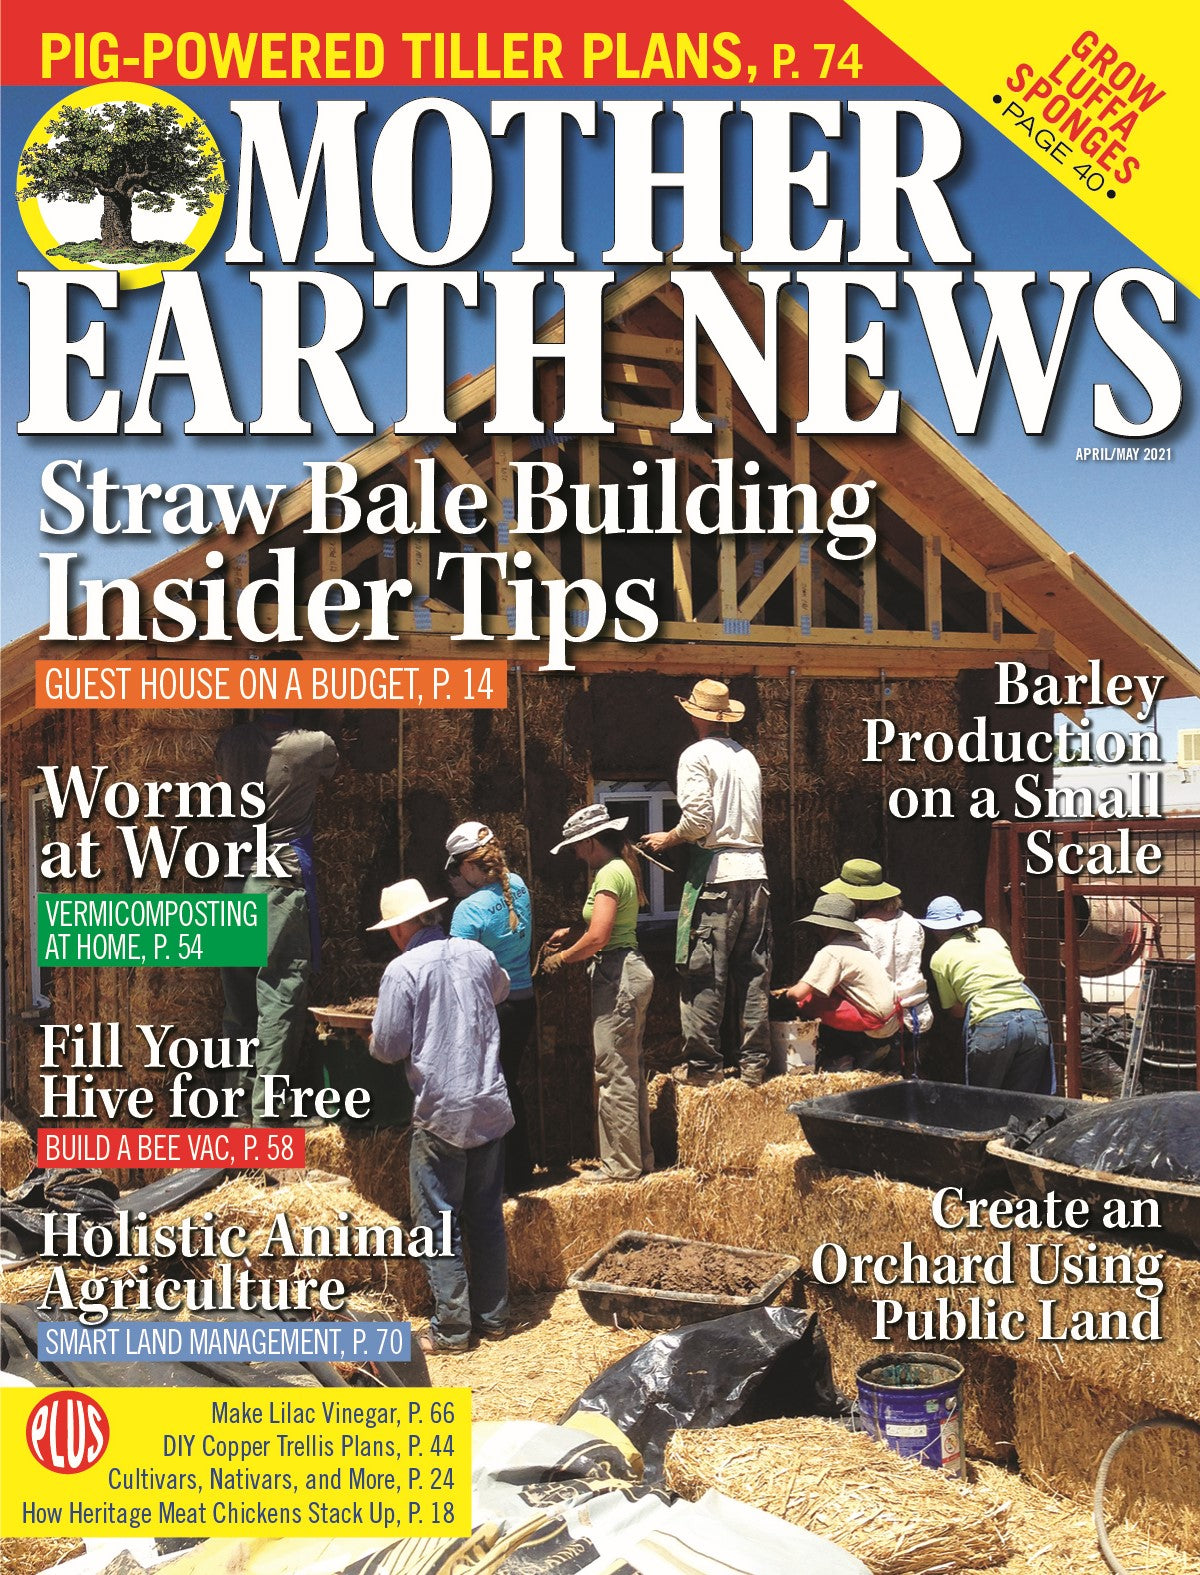 MOTHER EARTH NEWS APRIL/MAY 2021 #304